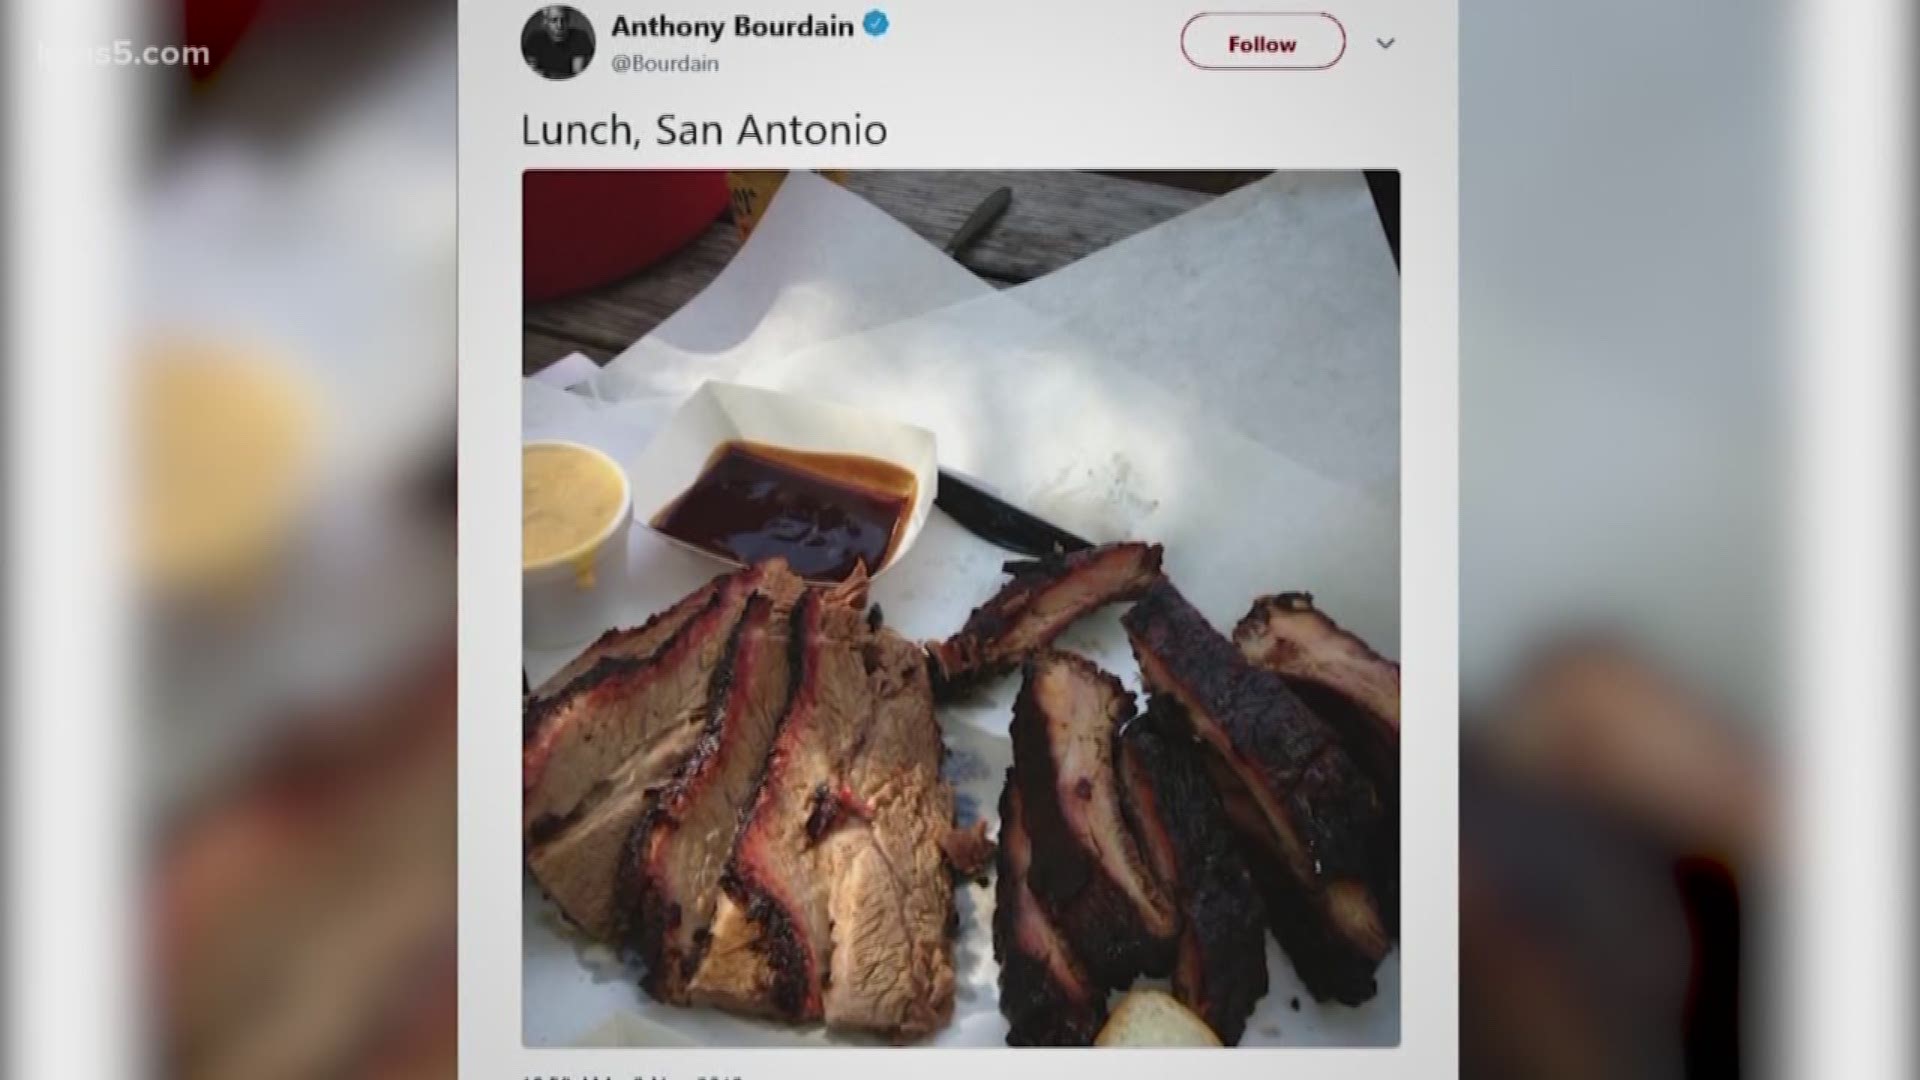 Six years ago, Anthony Bourdain visited San Antonio's Two Bros. BBQ Market, a day that owner Jason Dady remembers fondly.